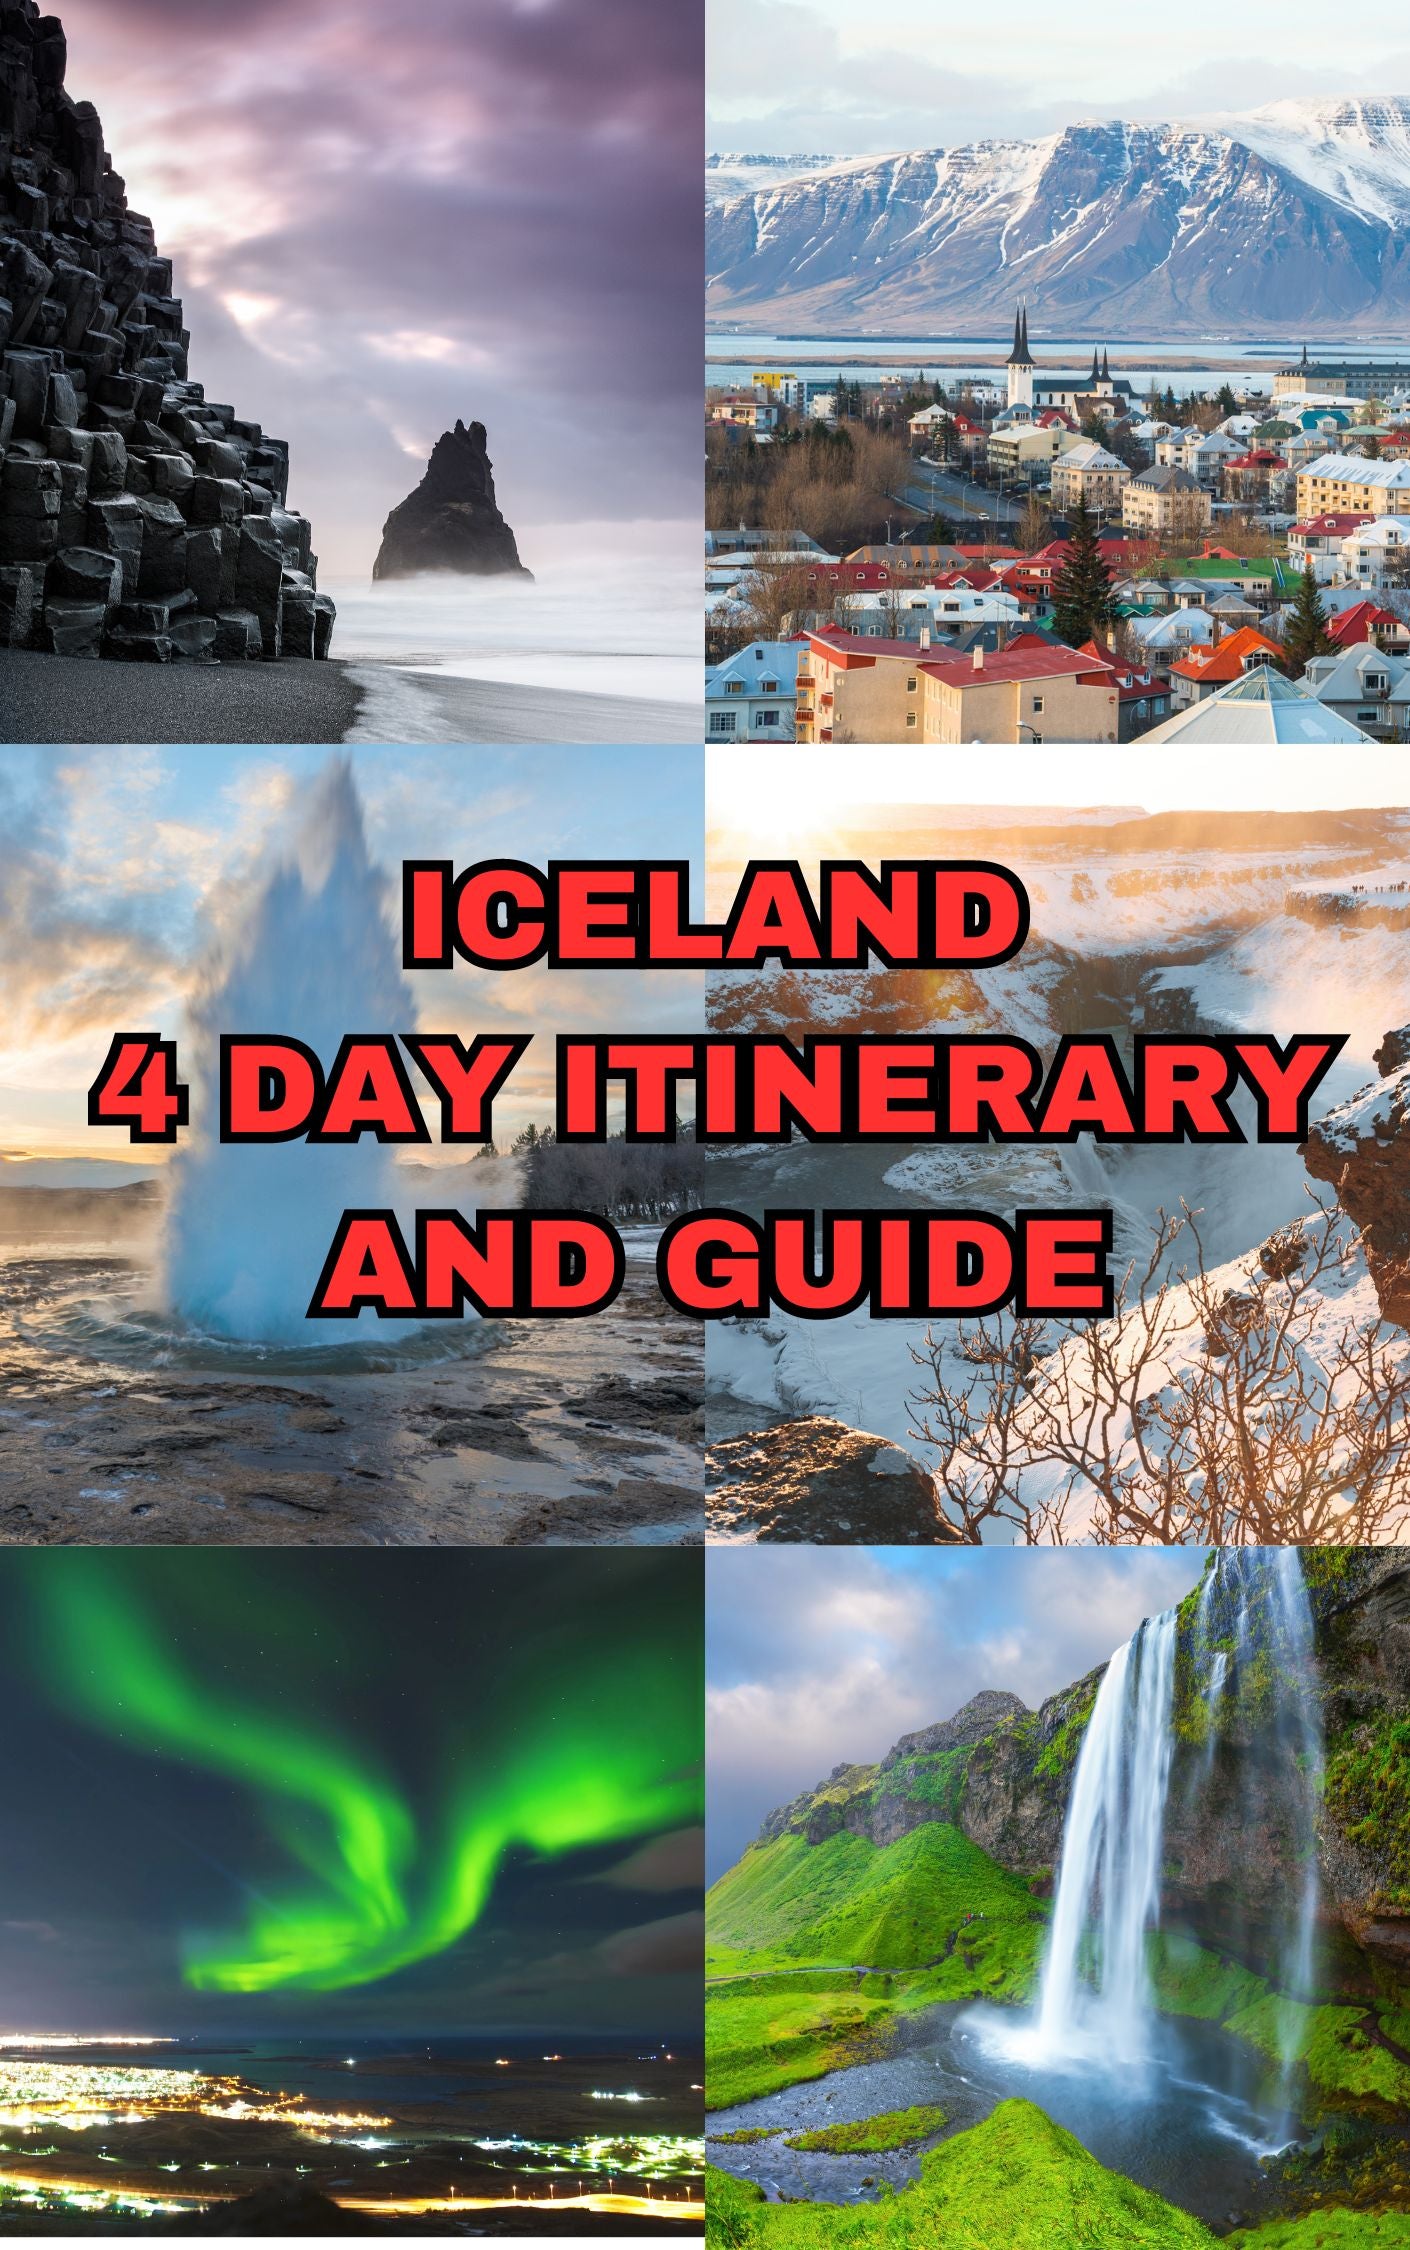 Iceland 4 day itinerary and guide